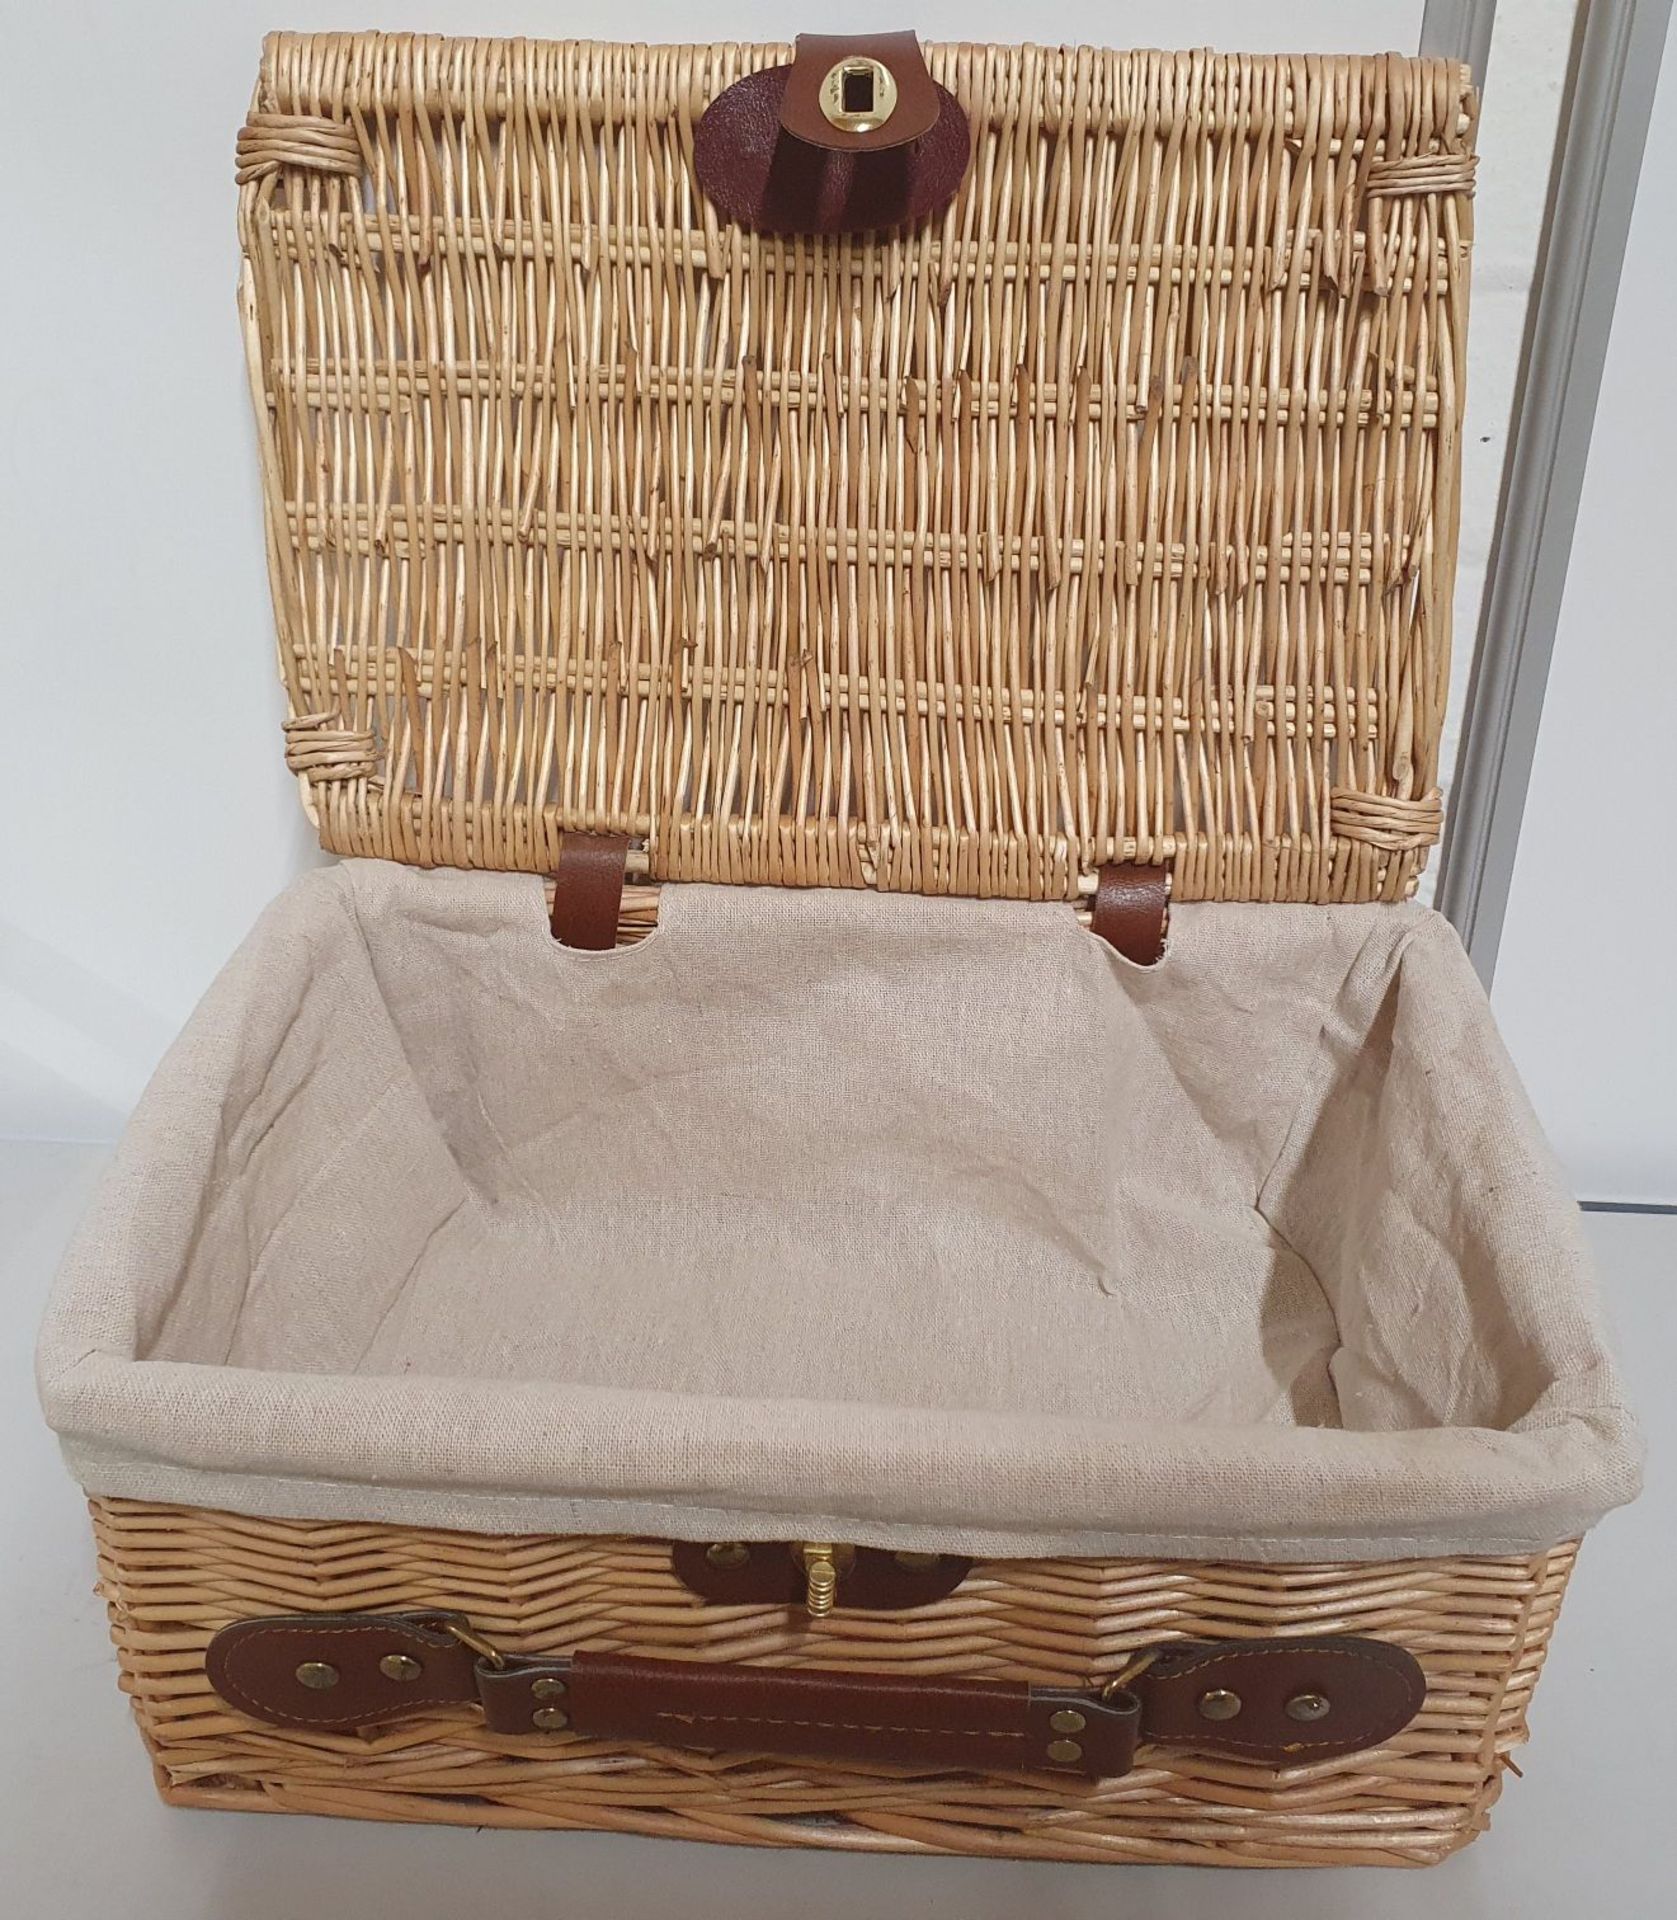 1 X WICKER BASKET SIZE: W-37CM H-17CM D-25CM RRP £10 - AS NEW - Image 2 of 2